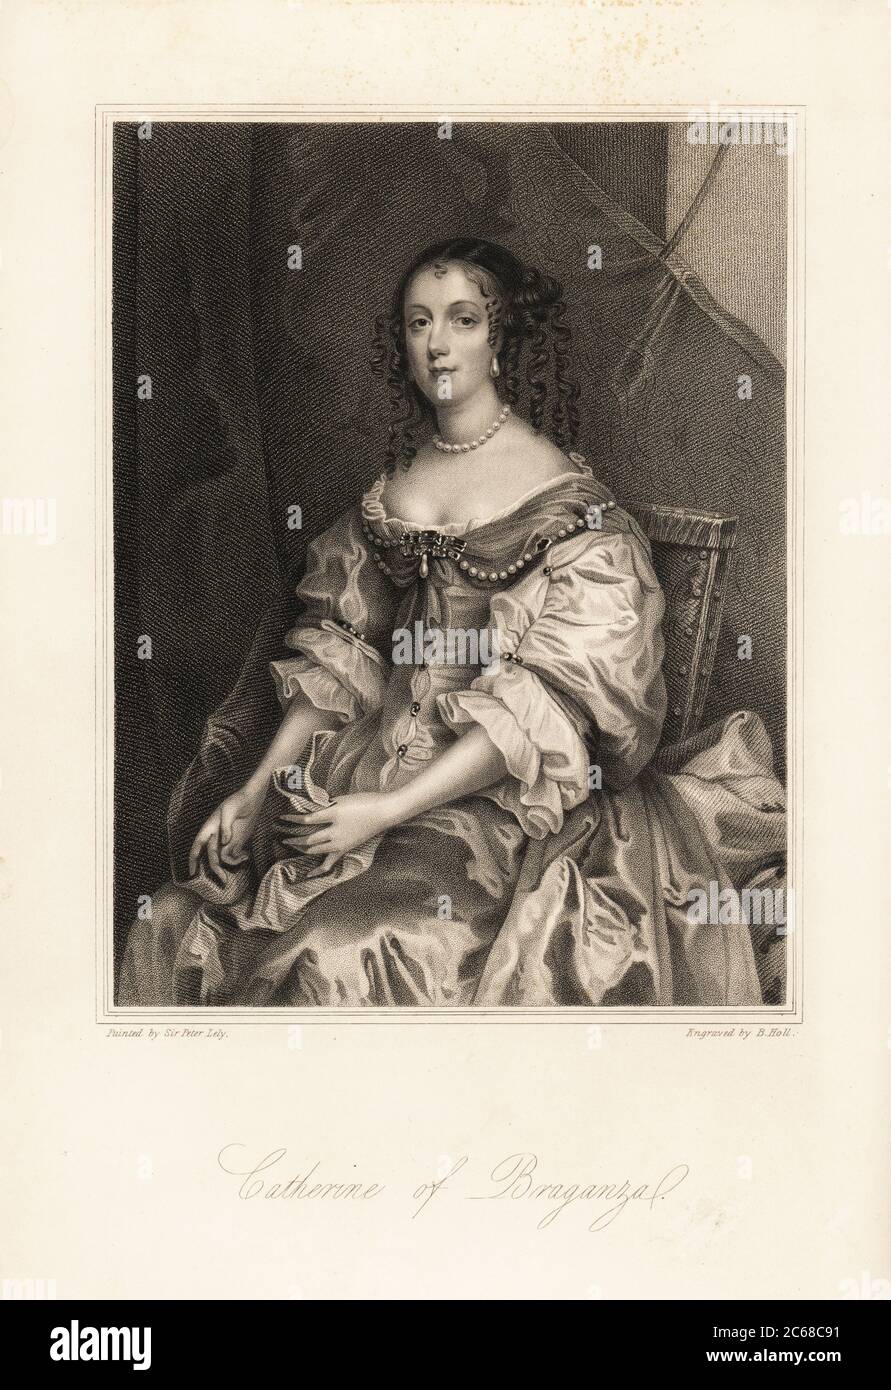 Catherine of Branganza, queen consort of England, wife to King Charles II, 1638-1705. Shown seated on the chair of state in pearls and white satin, painted around 1662-4. Steel engraving by B. Holl after a portrait by Sir Peter Lely from Mrs Anna Jameson’s Memoirs of the Beauties of the Court of King Charles the Second, Henry Coburn, London, 1838 Stock Photo